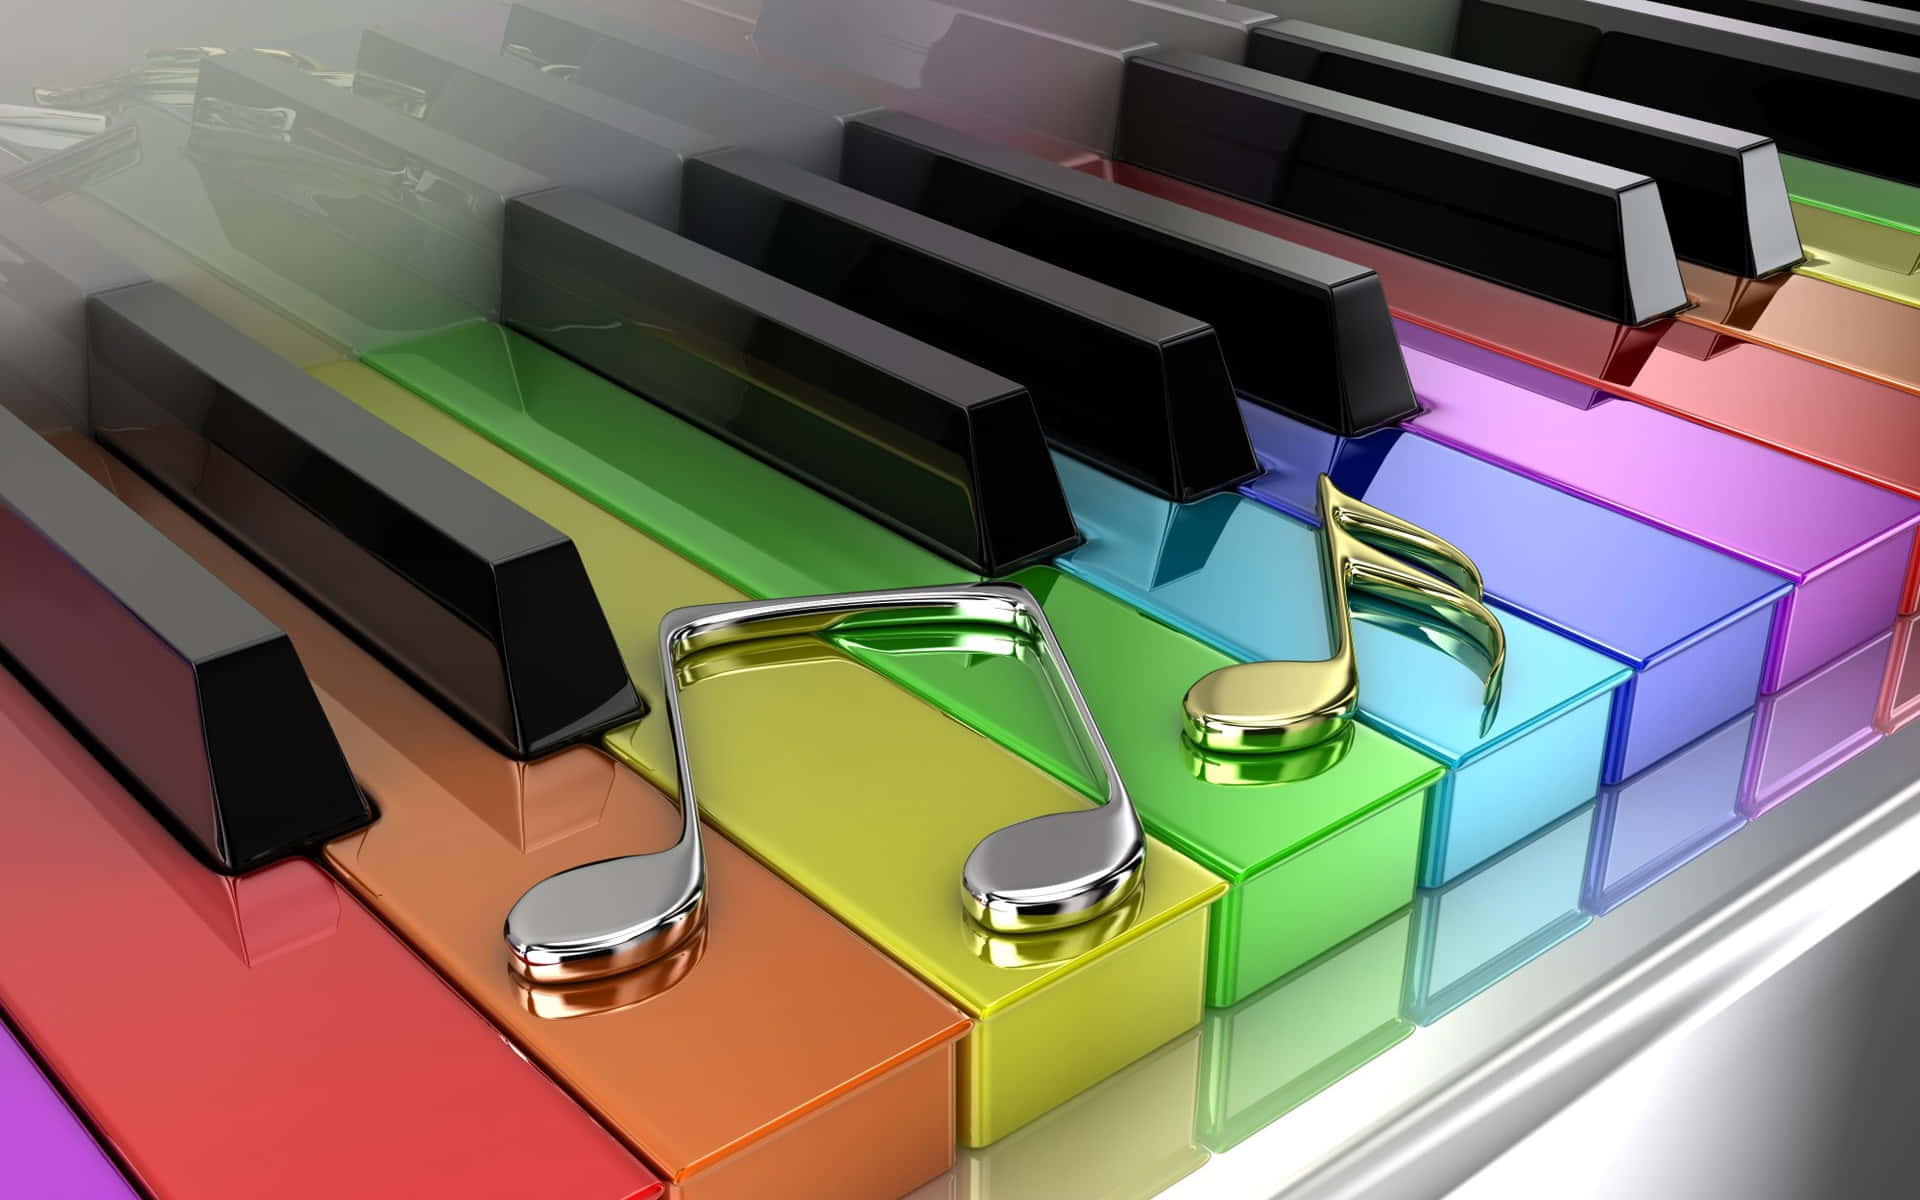 Embrace the beauty of music and play the piano!